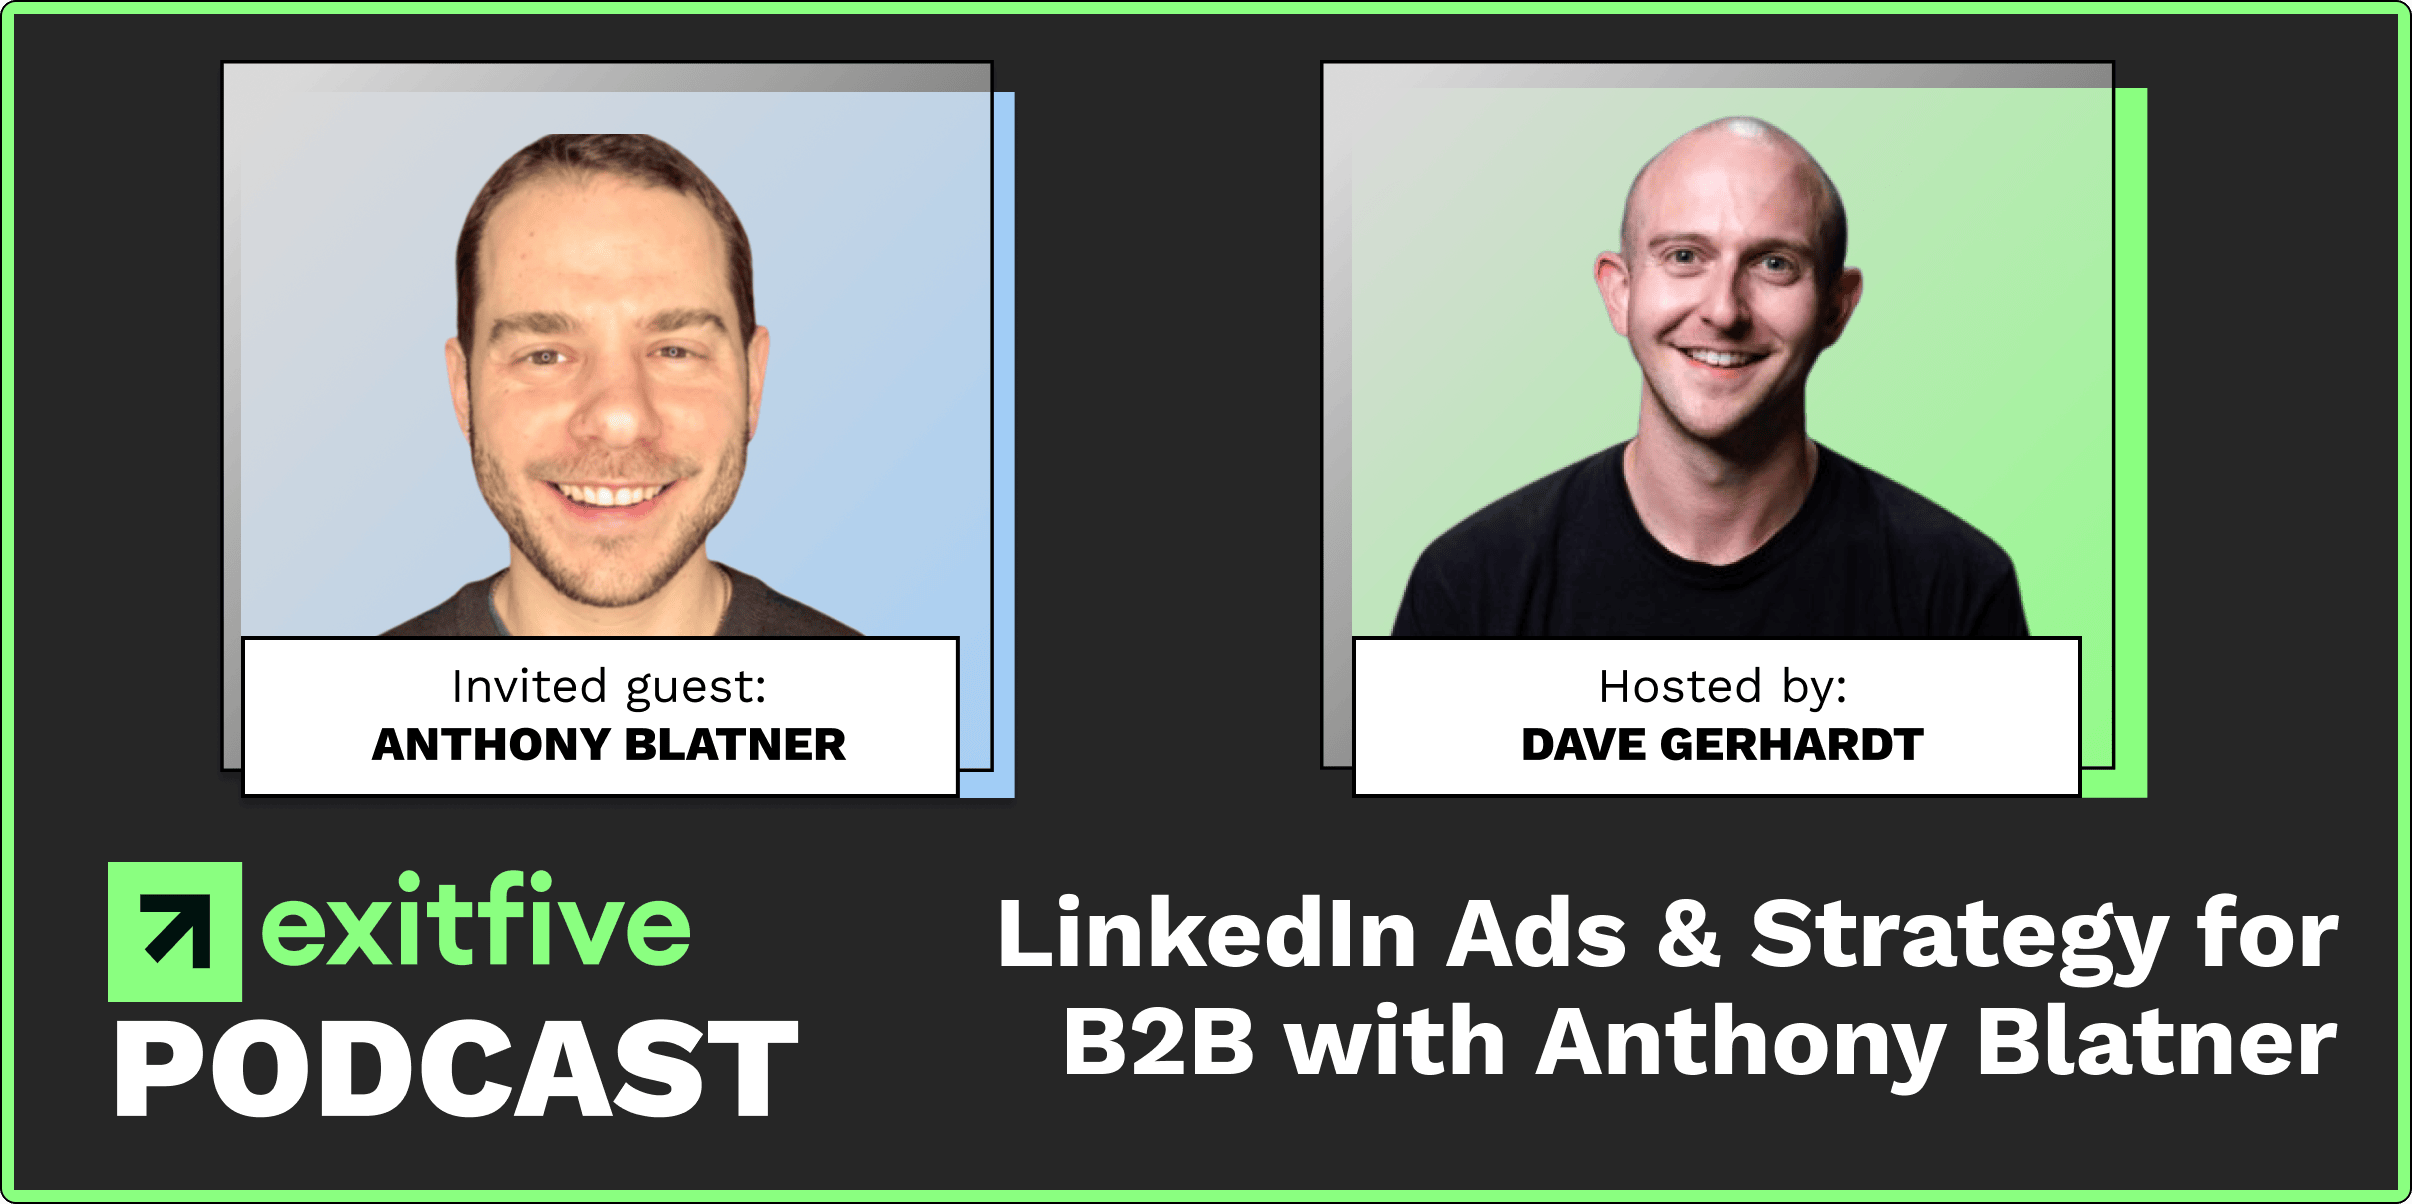 Growth | LinkedIn Ads & Strategy for B2B with Anthony Blatner